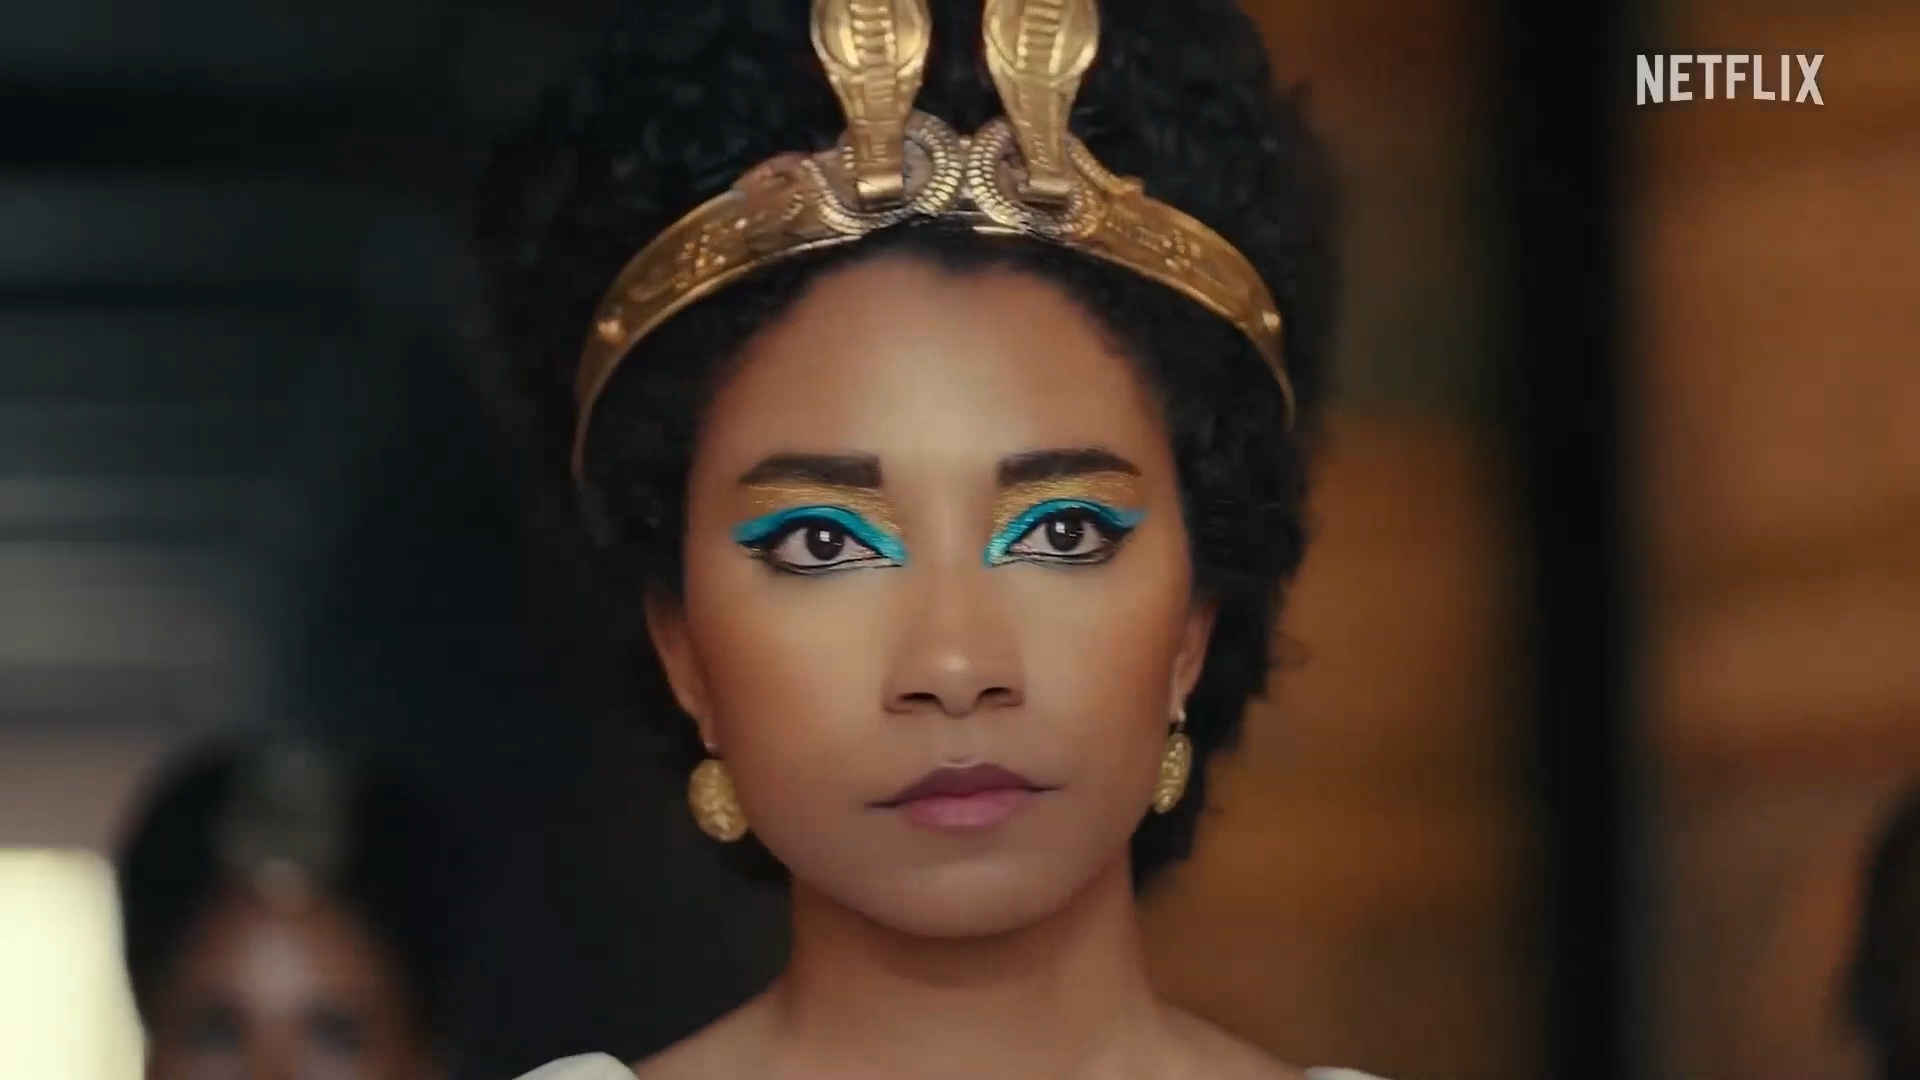 It's Ludicrous That Africans Want The Imagery Of Cleopatra To Be White, Though She Was Egyptian